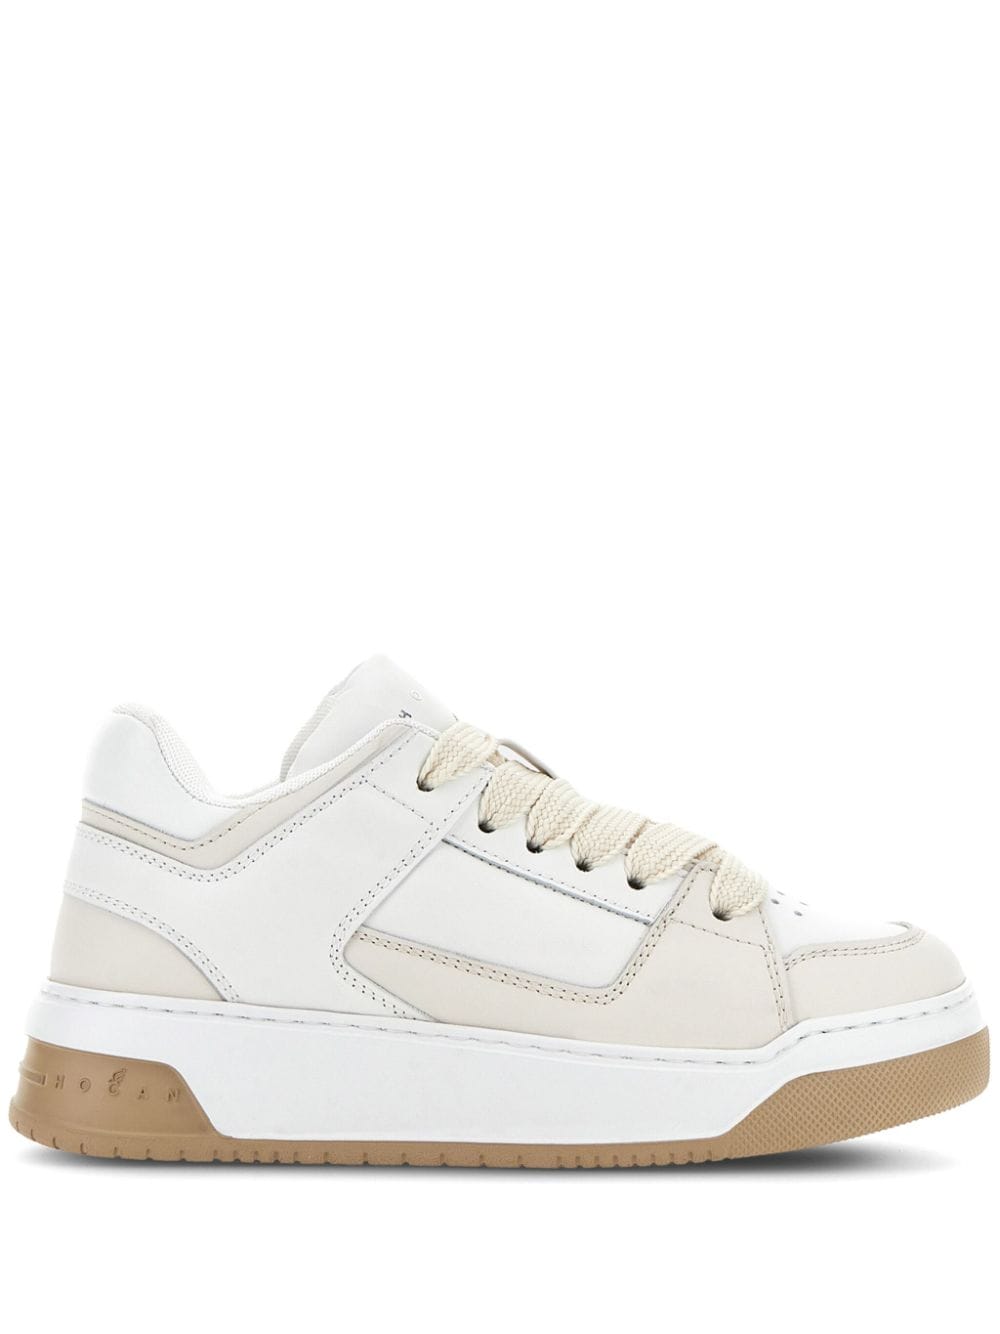 Hogan H667 lace-up leather sneakers - Neutrals